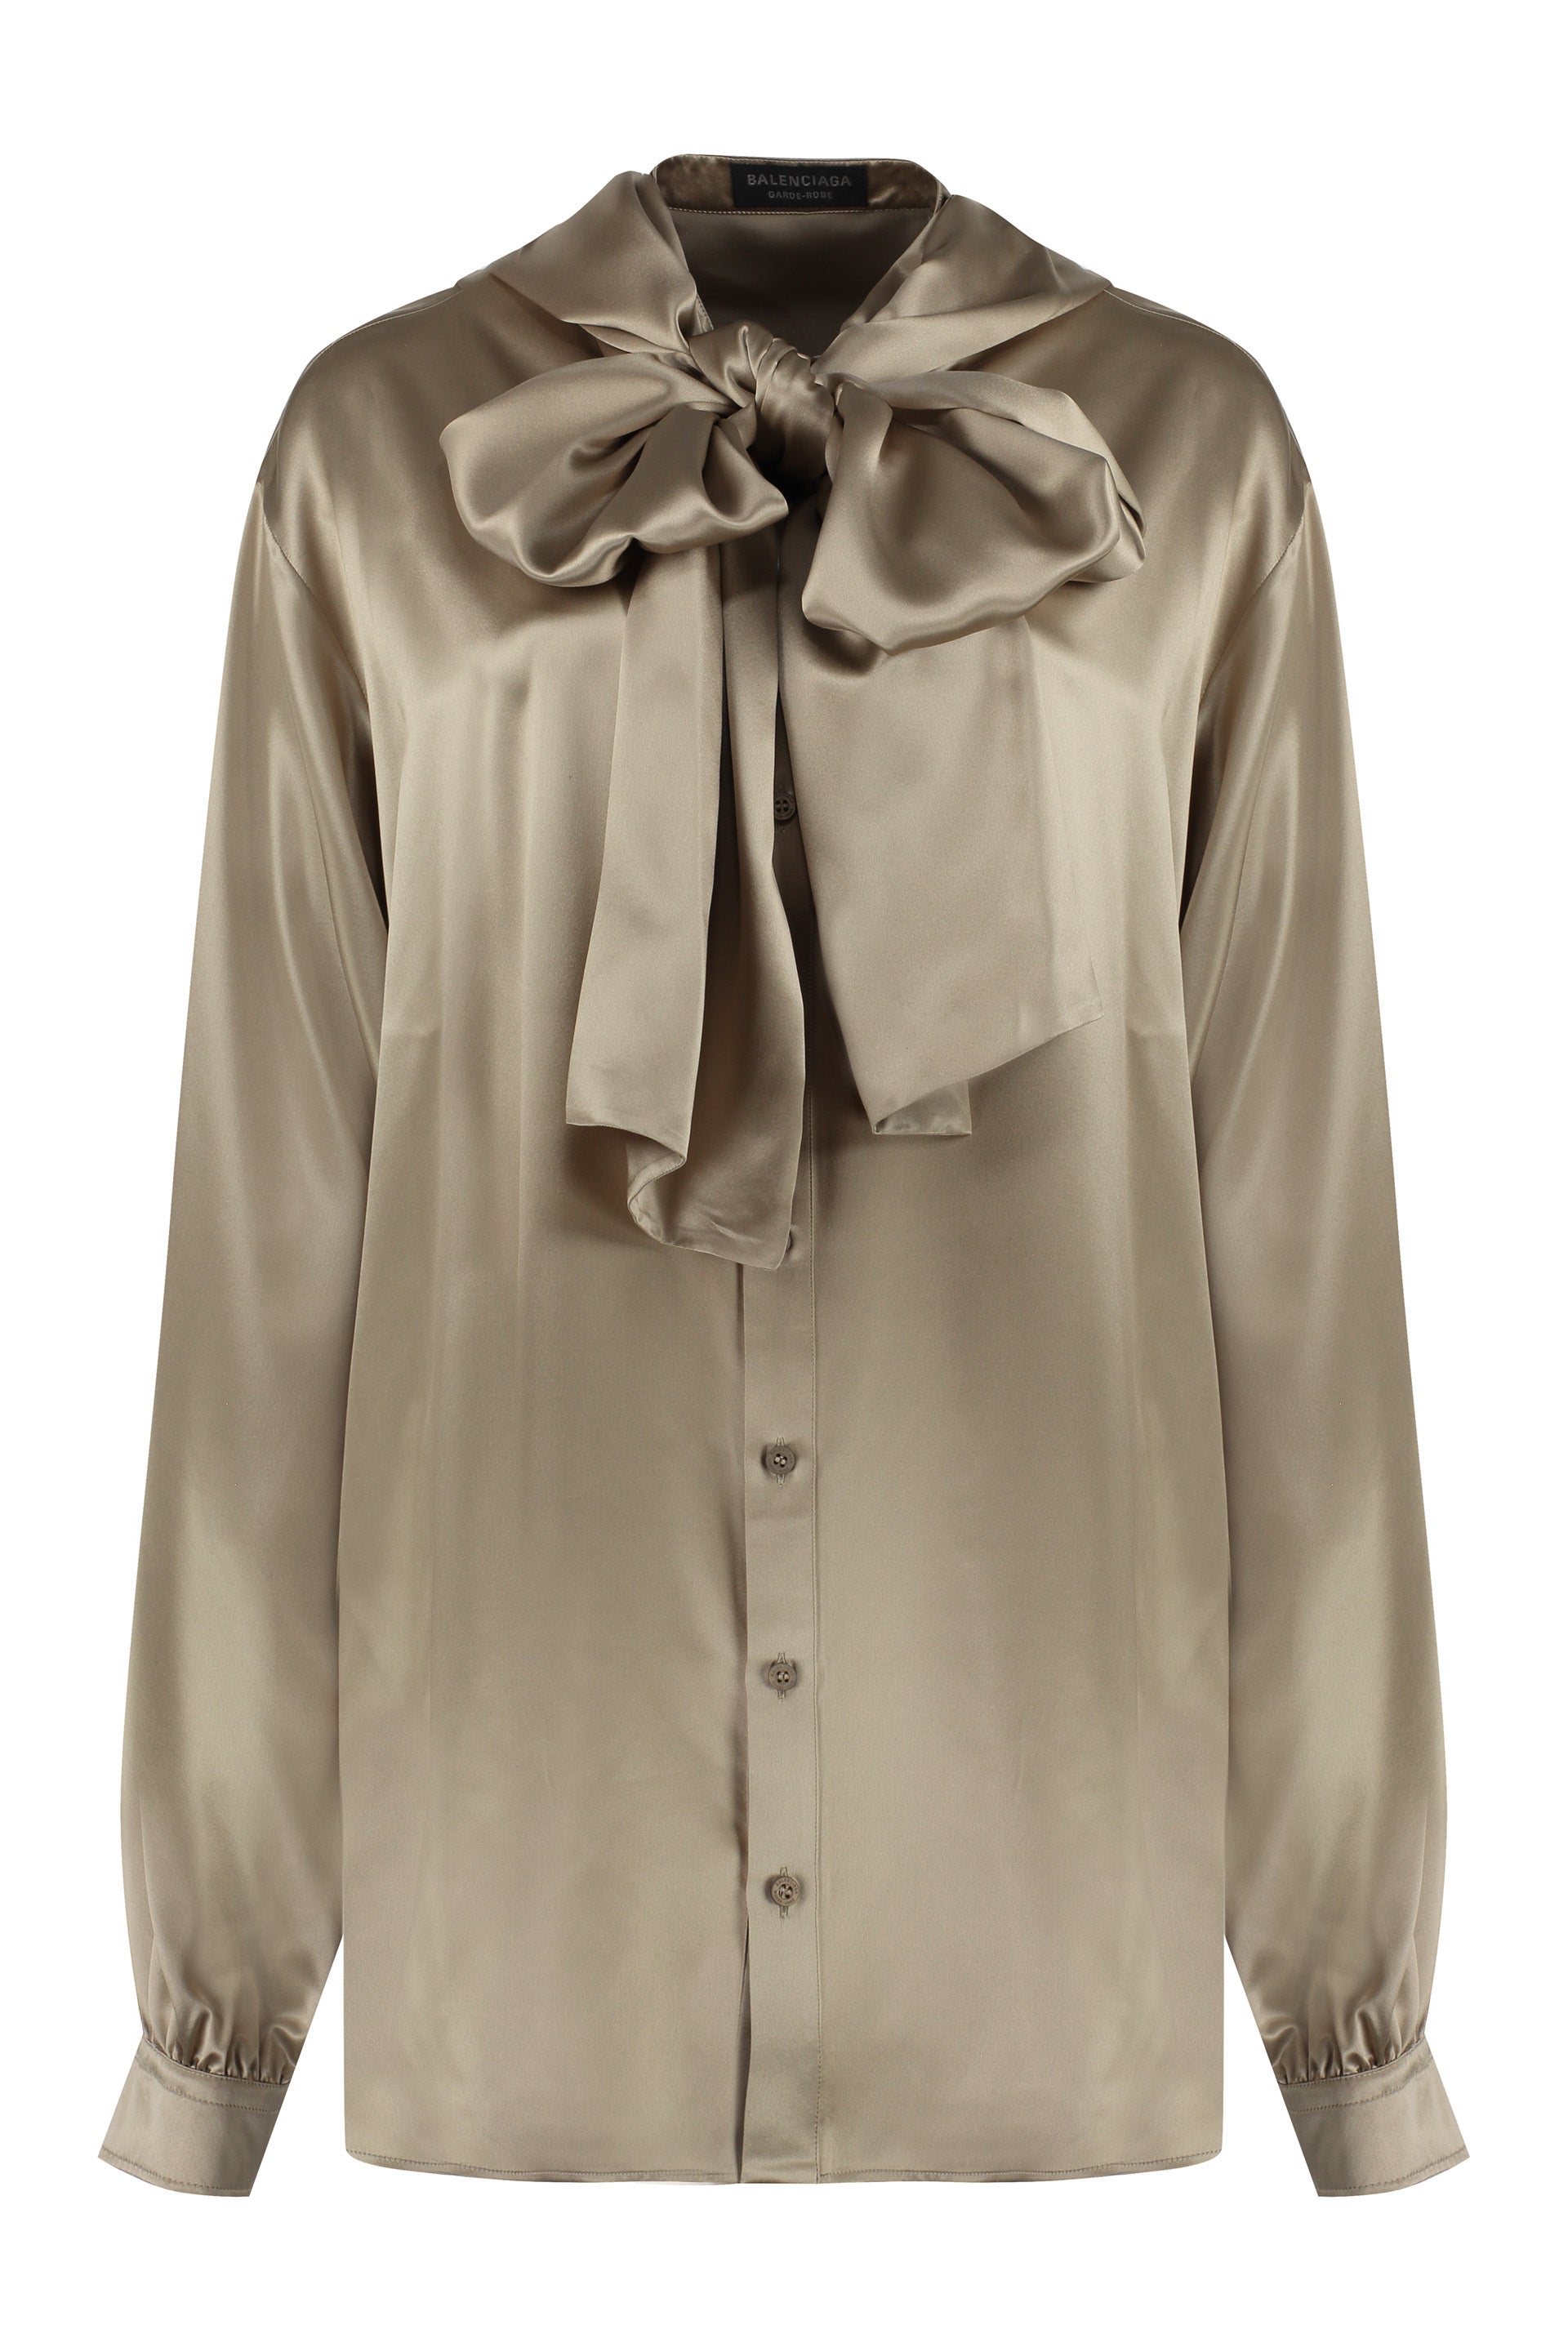 Shop Balenciaga Women's Beige Silk Hooded Blouse With Pussy-bow Detail And Buttoned Cuffs